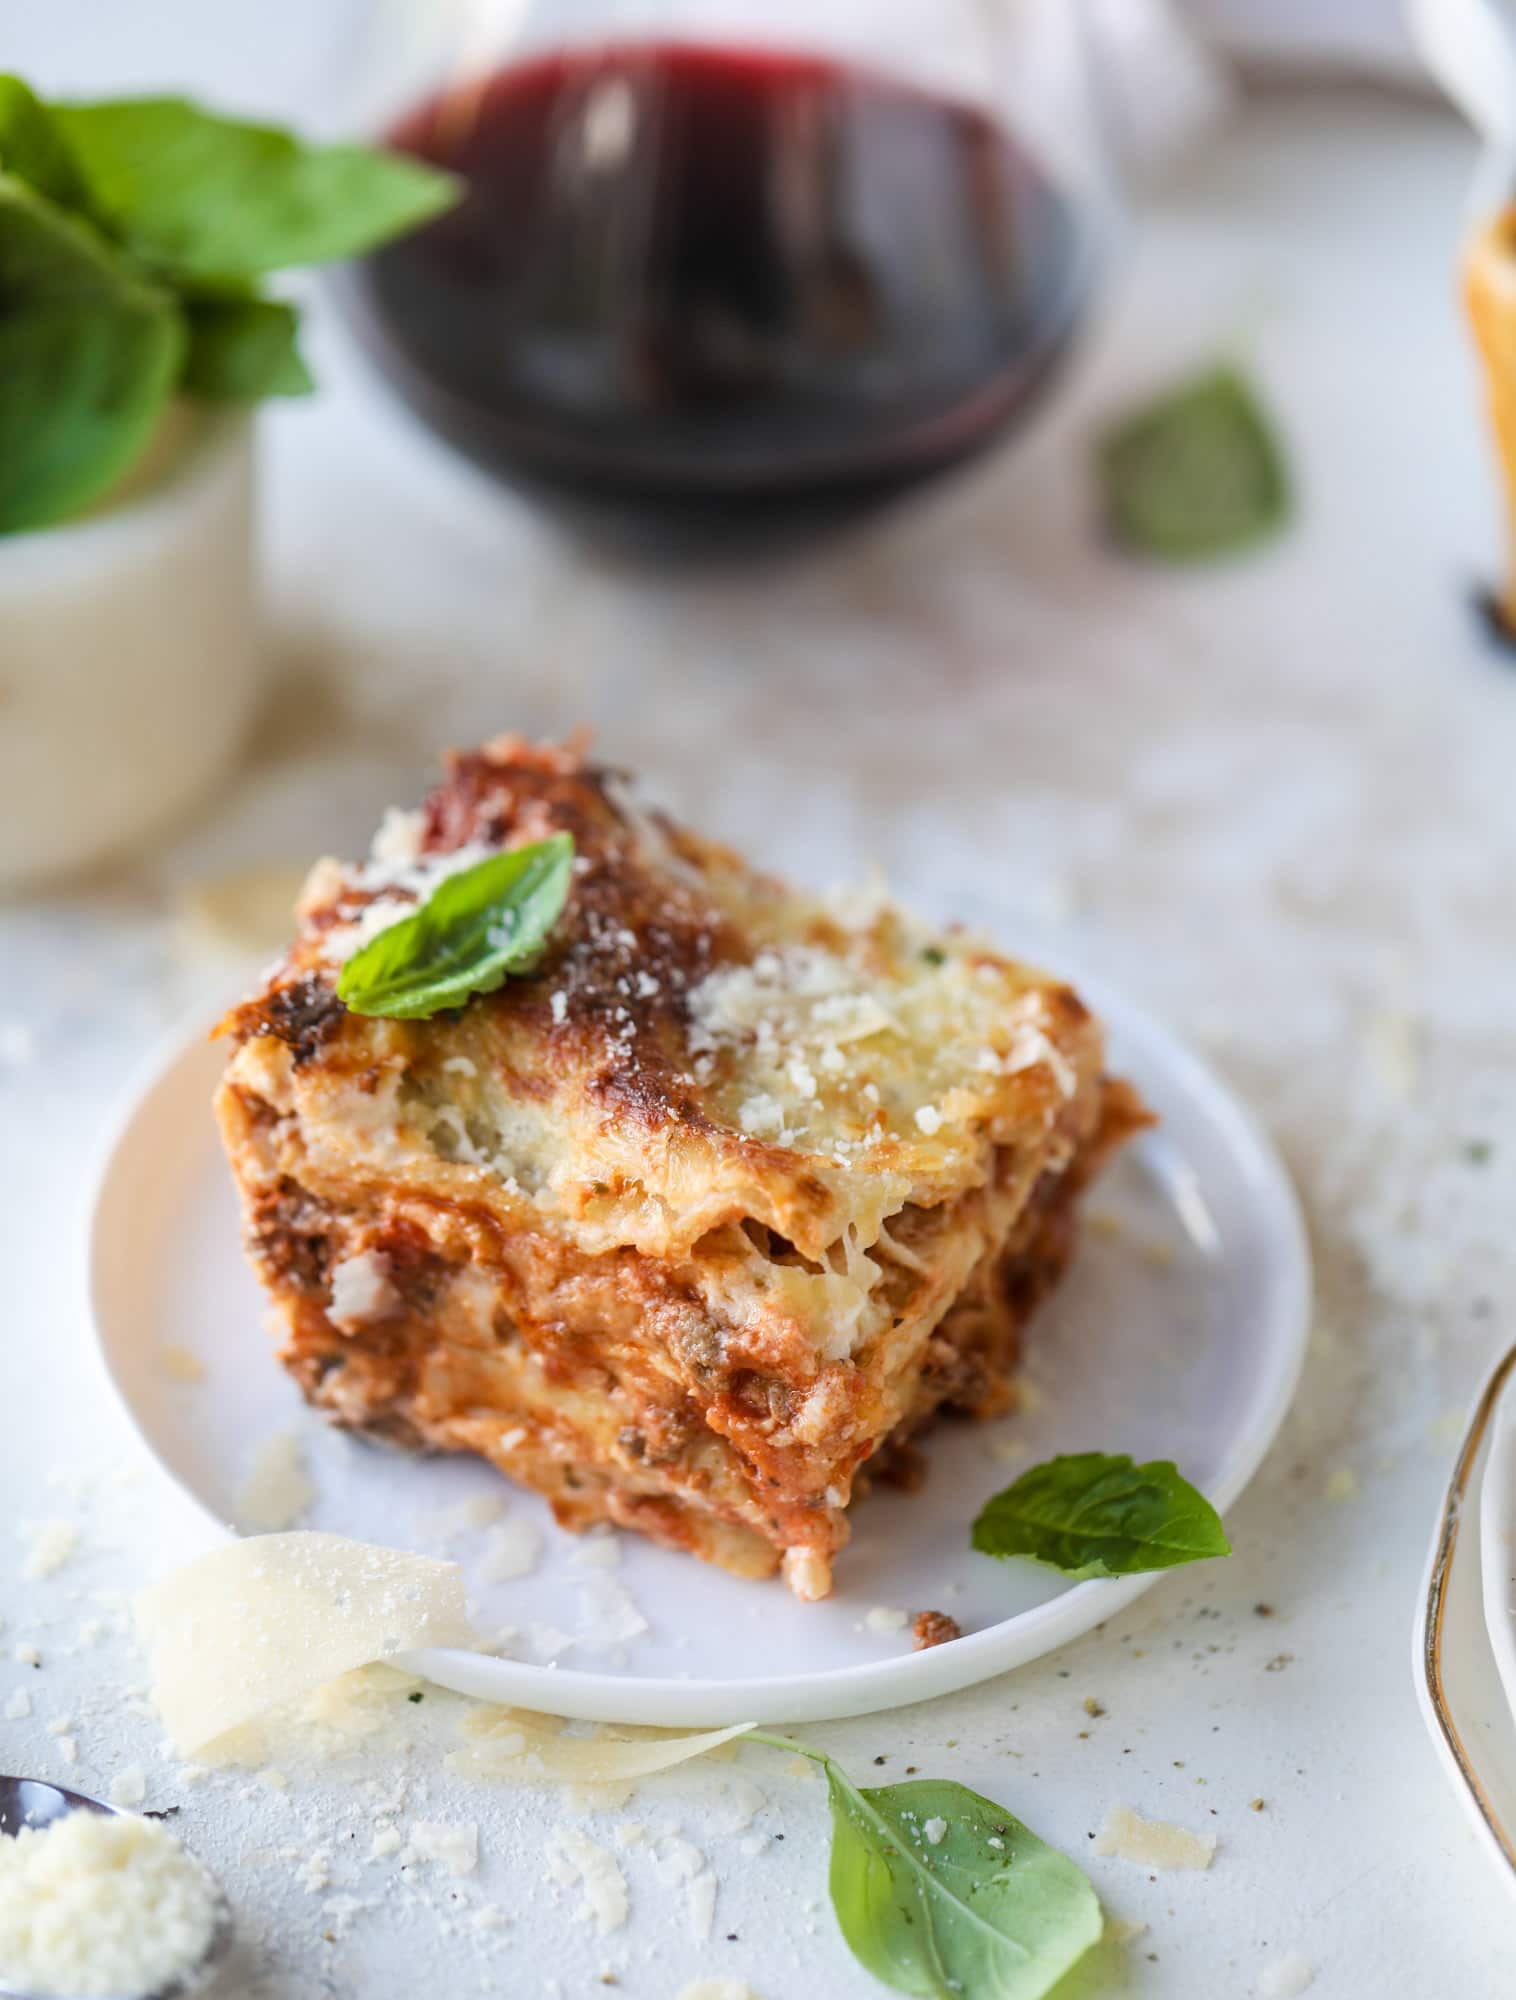 This lasagna bolognese is the ultimate comfort food. Meaty sauce, whole wheat lasagna noodles, creamy bechamel and grated cheese come together to create the most perfect slice of lasagna heaven! I howsweeteats.com #lasagna #bolognese